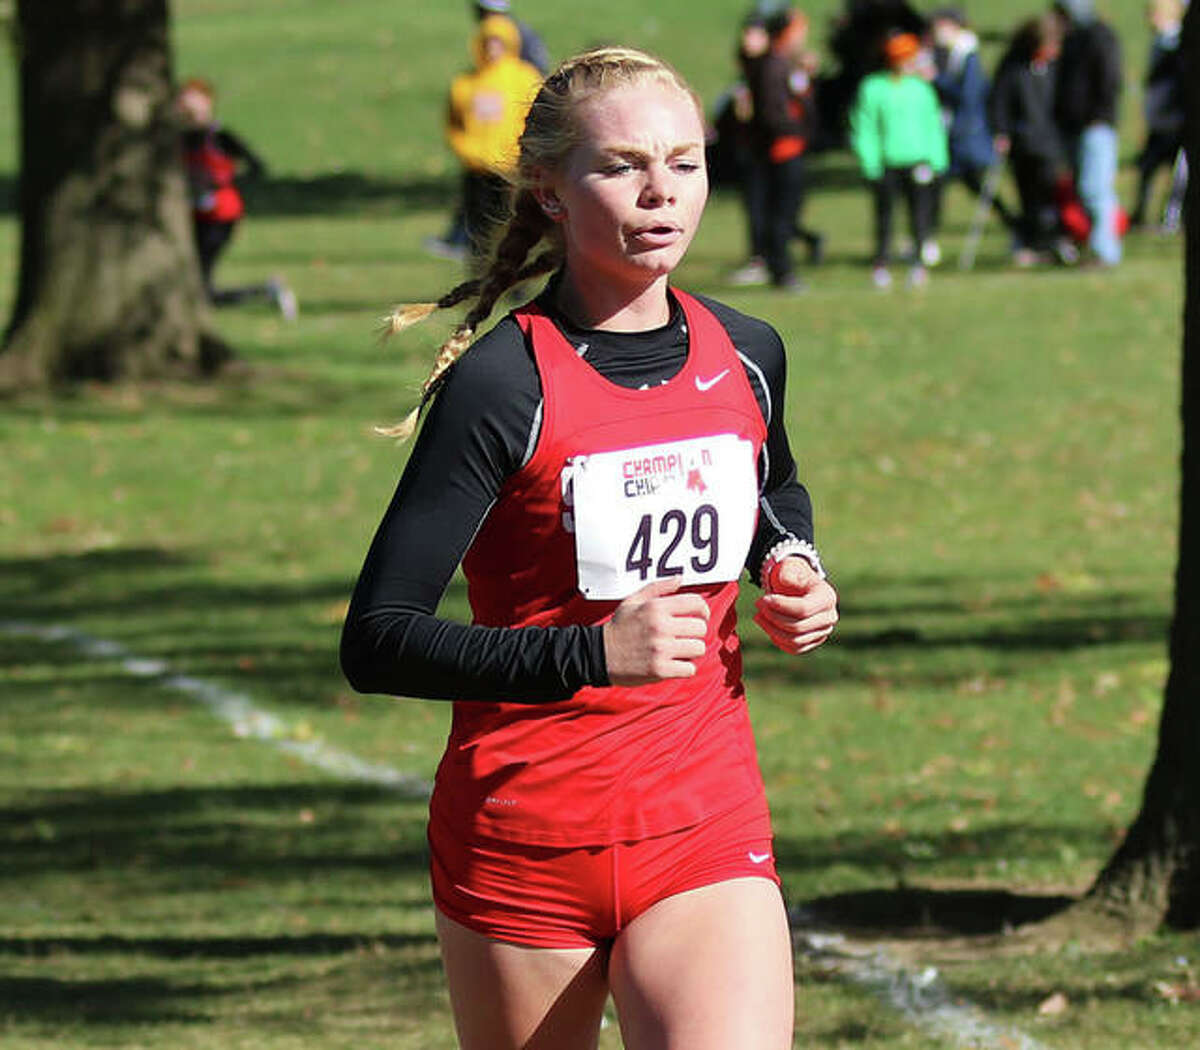 Staunton senior Dana Jarden, shown running in the Decatur St. Teresa Class 1A Sectional in Forsyth, as among the high school cross country runners honored among 2020’s best by the Alton Road Runners Club.